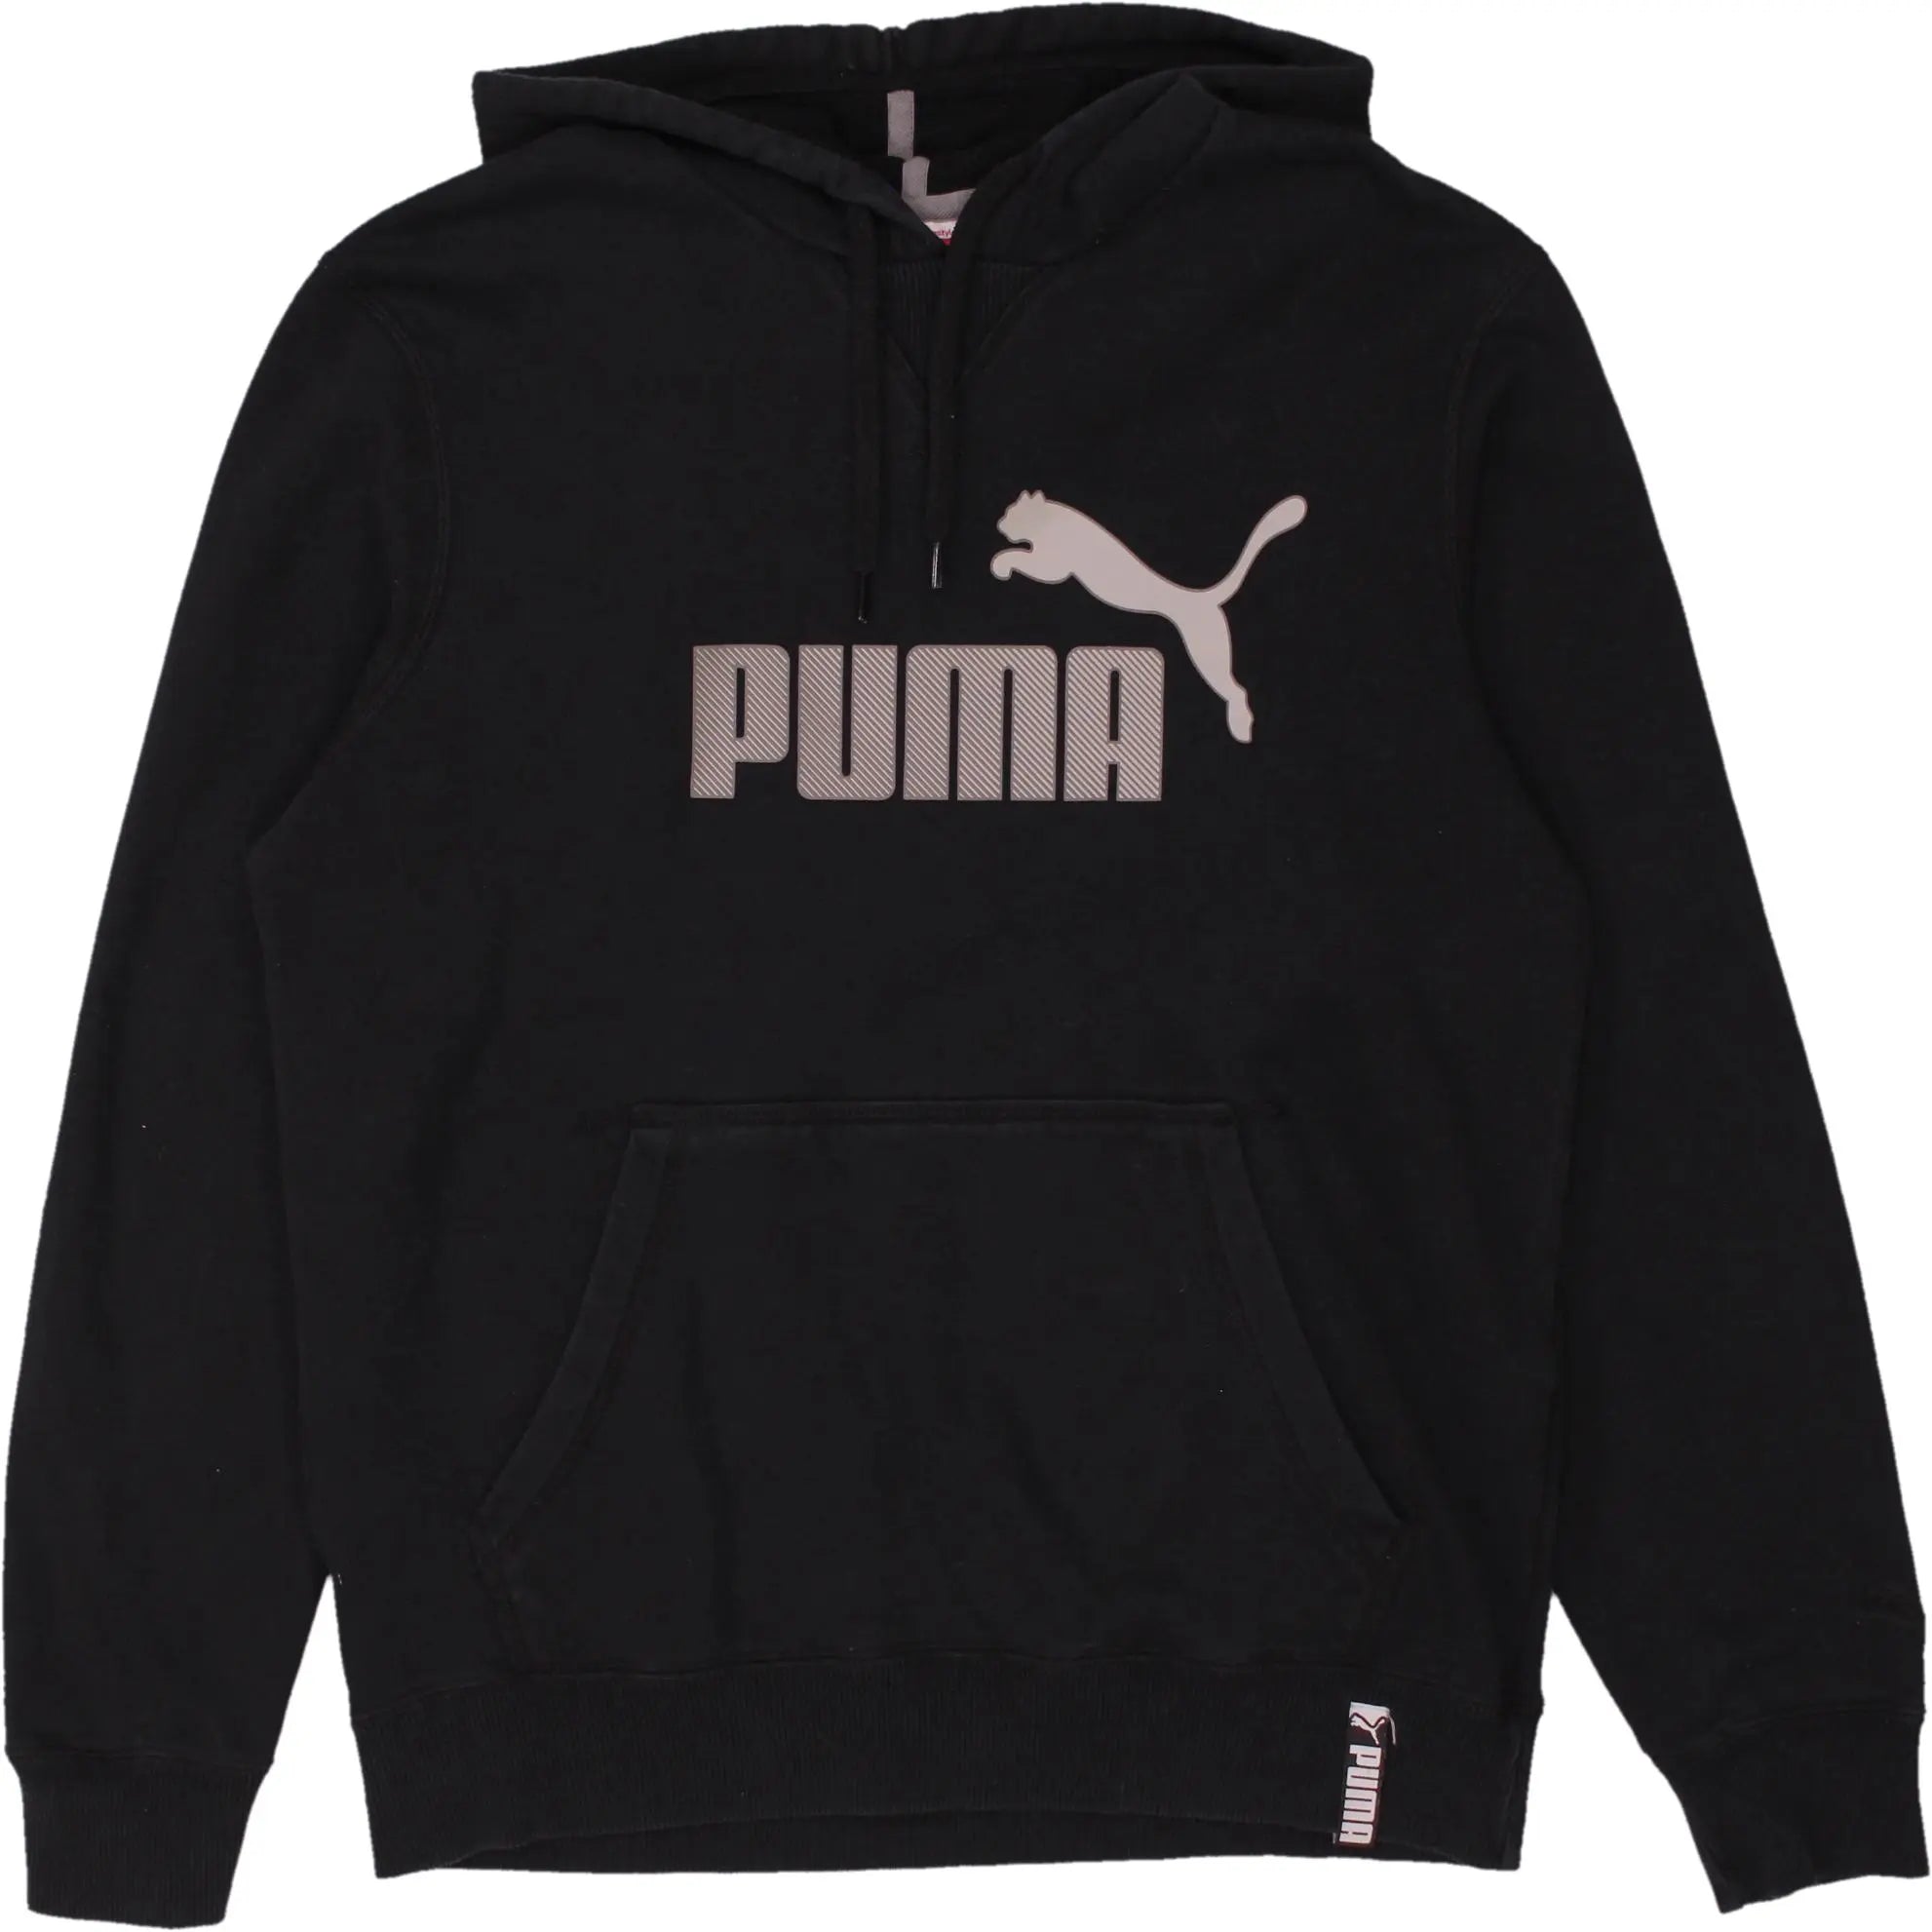 Puma - Blue Hoodie by Puma- ThriftTale.com - Vintage and second handclothing